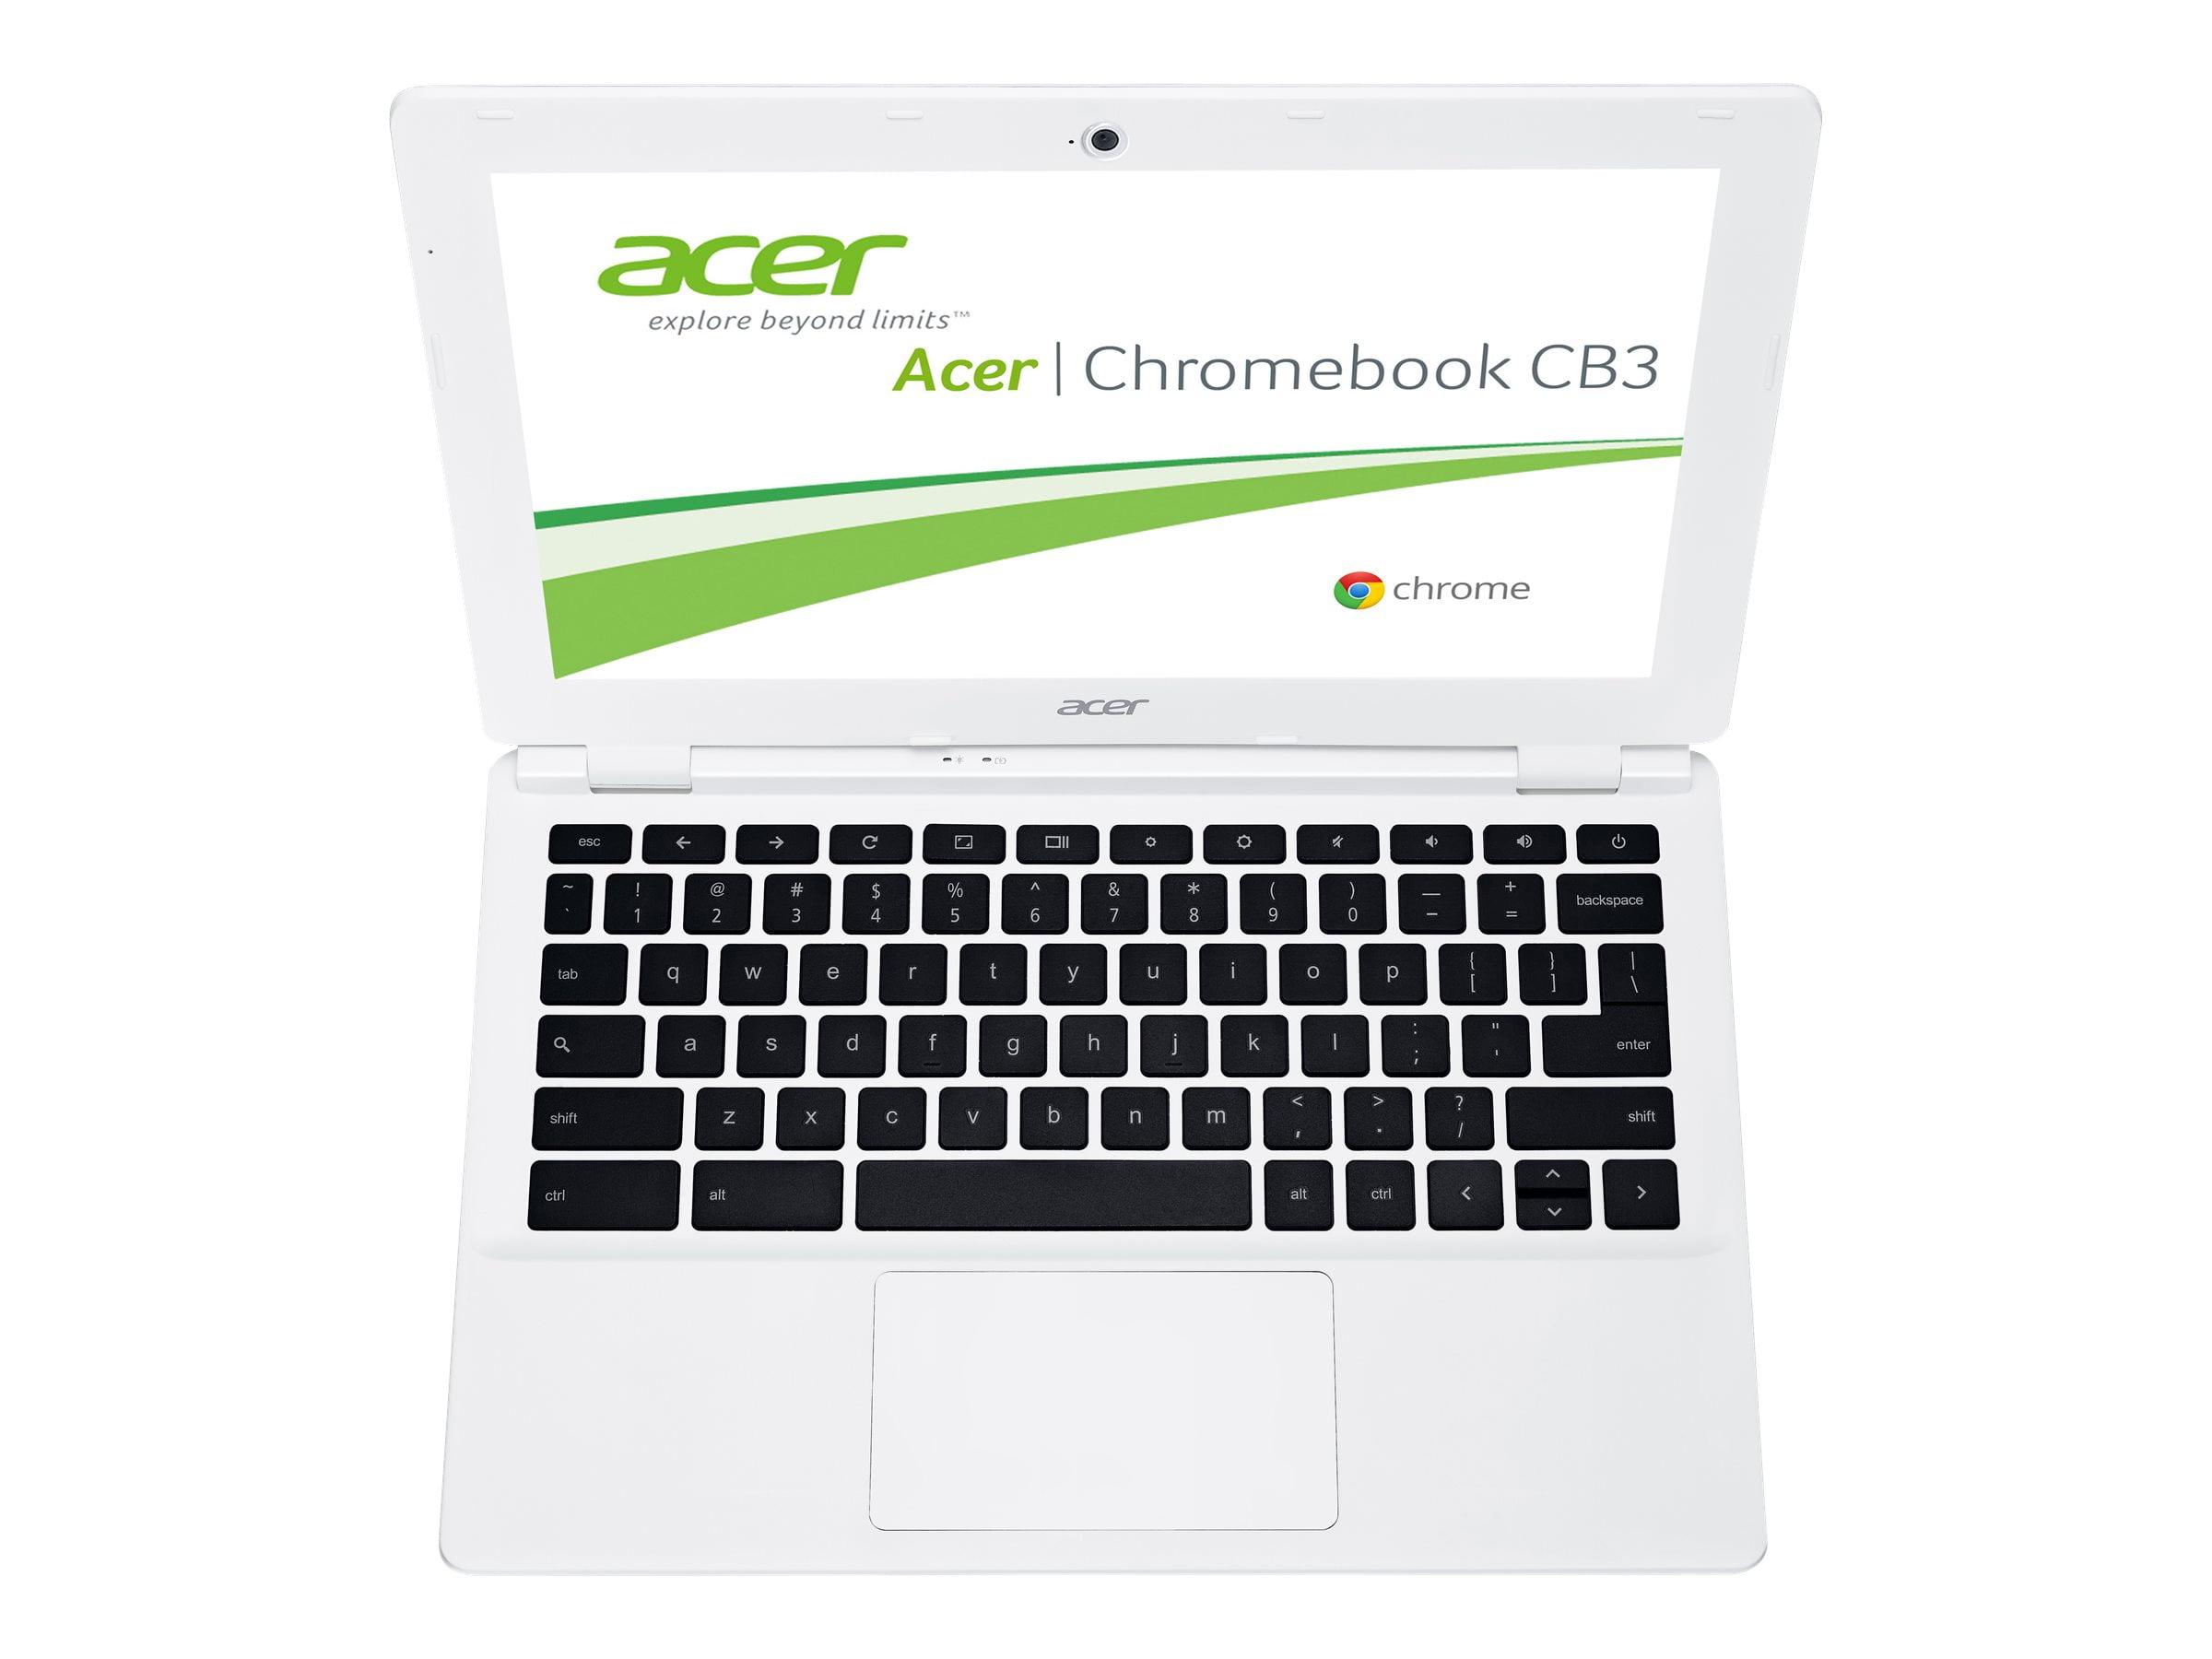 Acer Chromebook, 11.6-Inch, CB3-111-C670 (Intel Celeron, 2GB, 16GB SSD,  White) **Discontinued by Manufacturer**